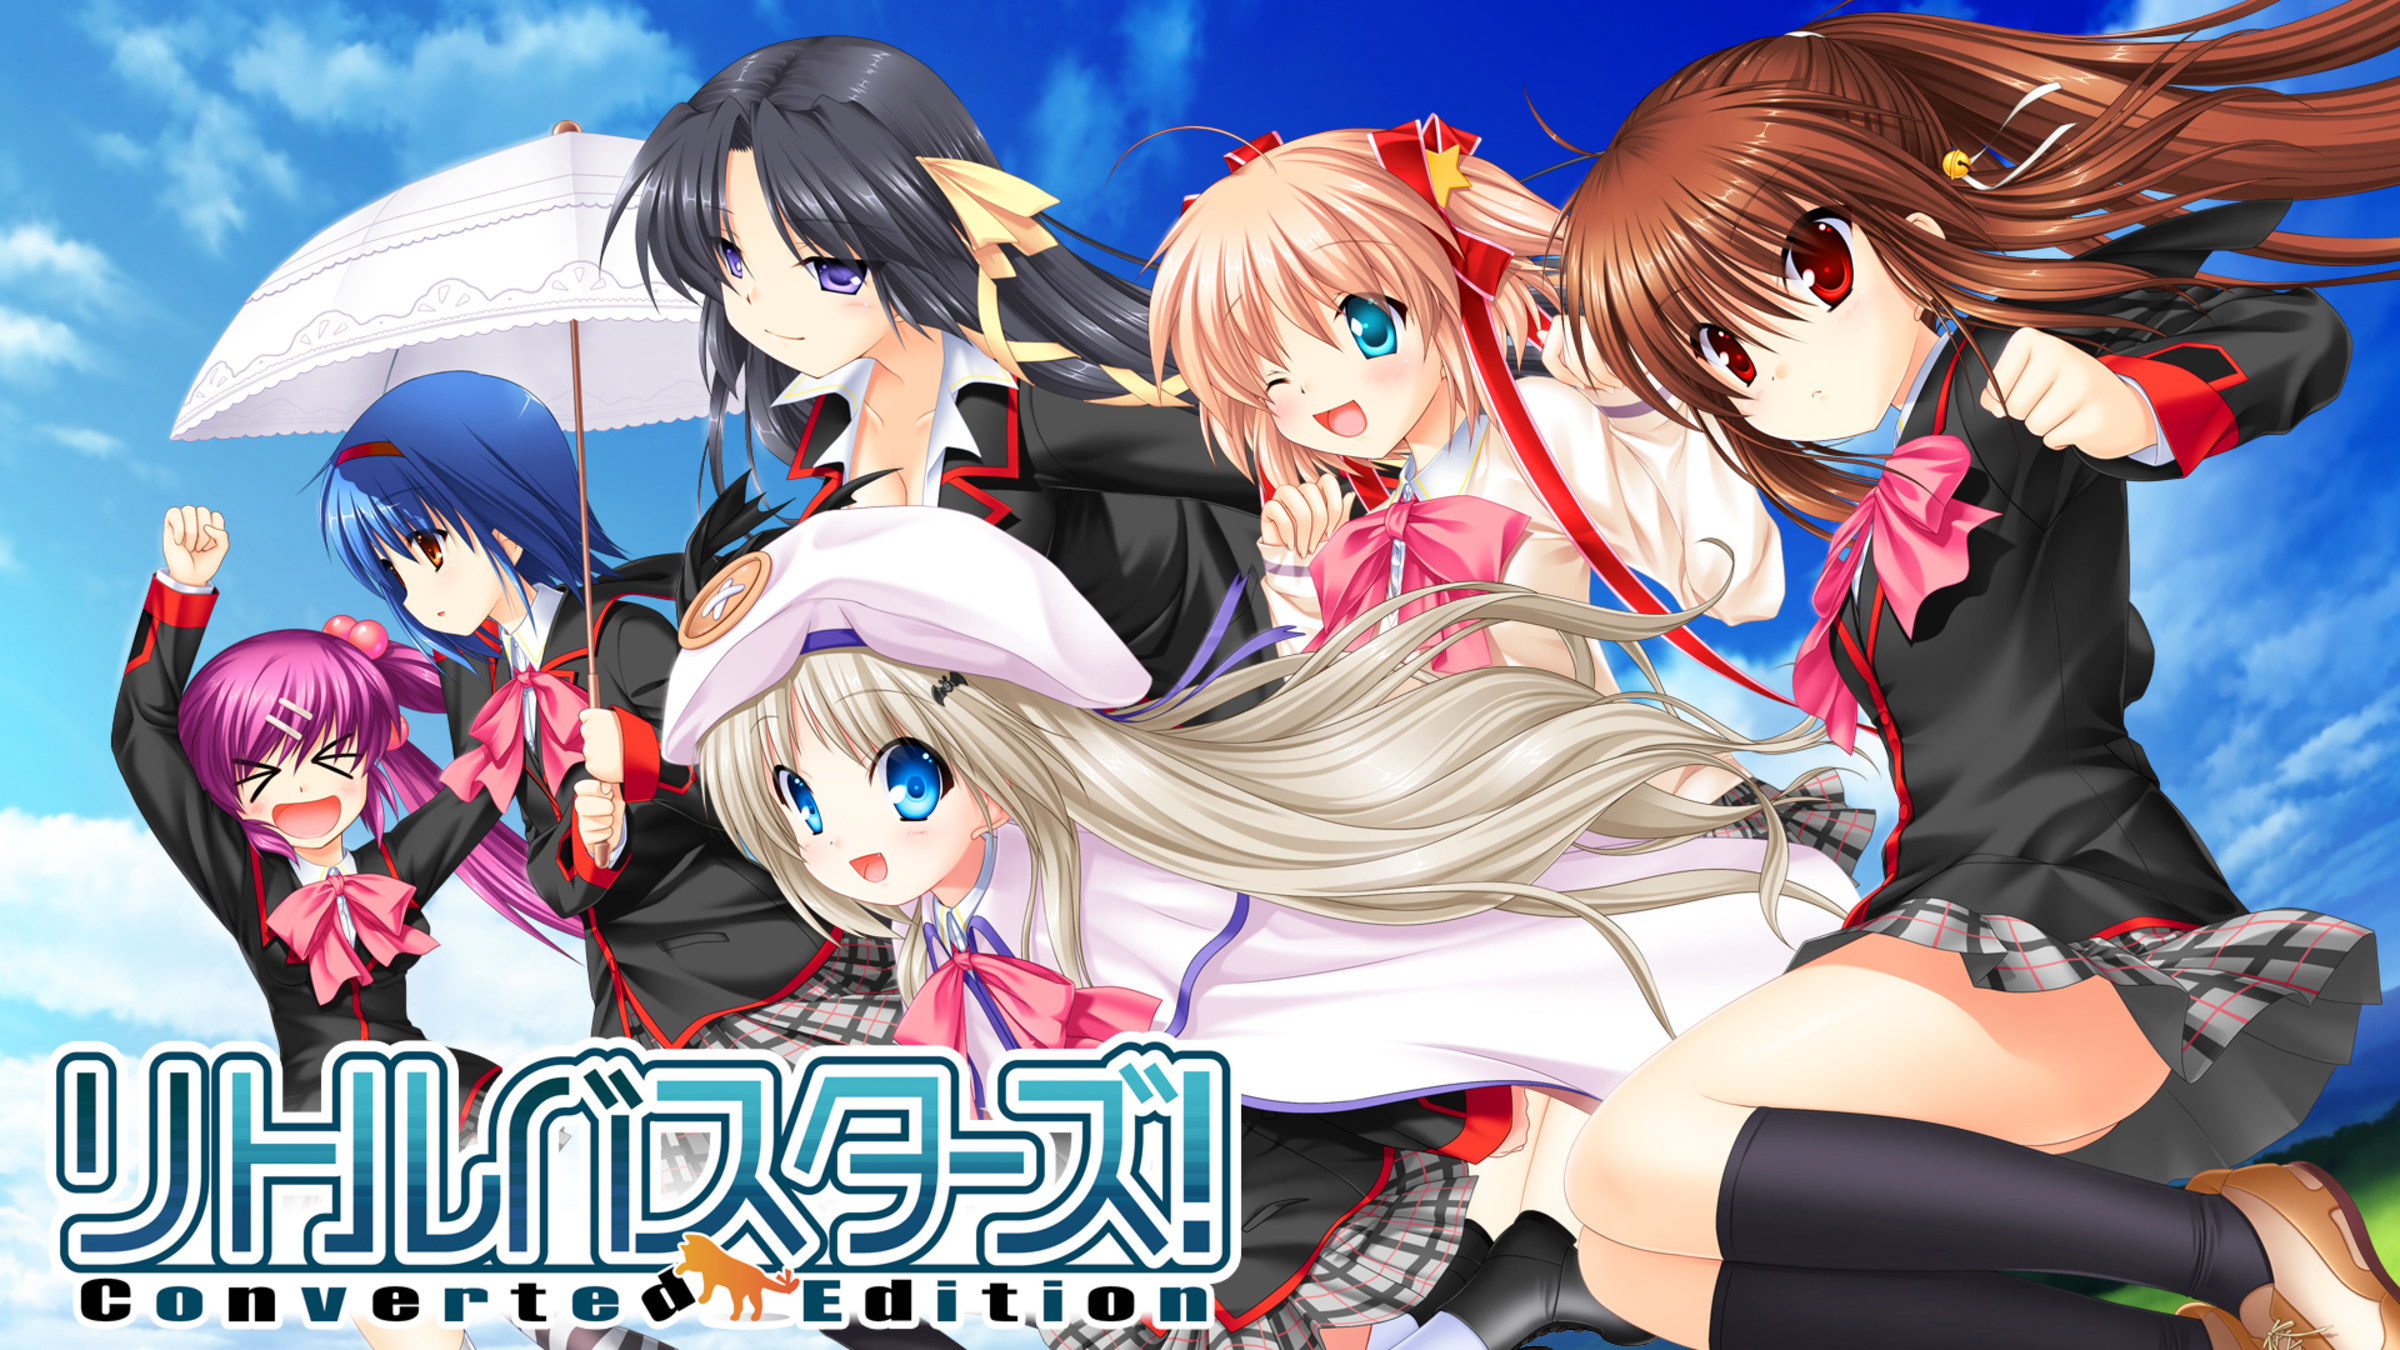 https://assets.nintendo.com/image/upload/c_fill,w_1200/q_auto:best/f_auto/dpr_2.0/ncom/en_US/games/switch/l/little-busters-converted-edition-switch/hero